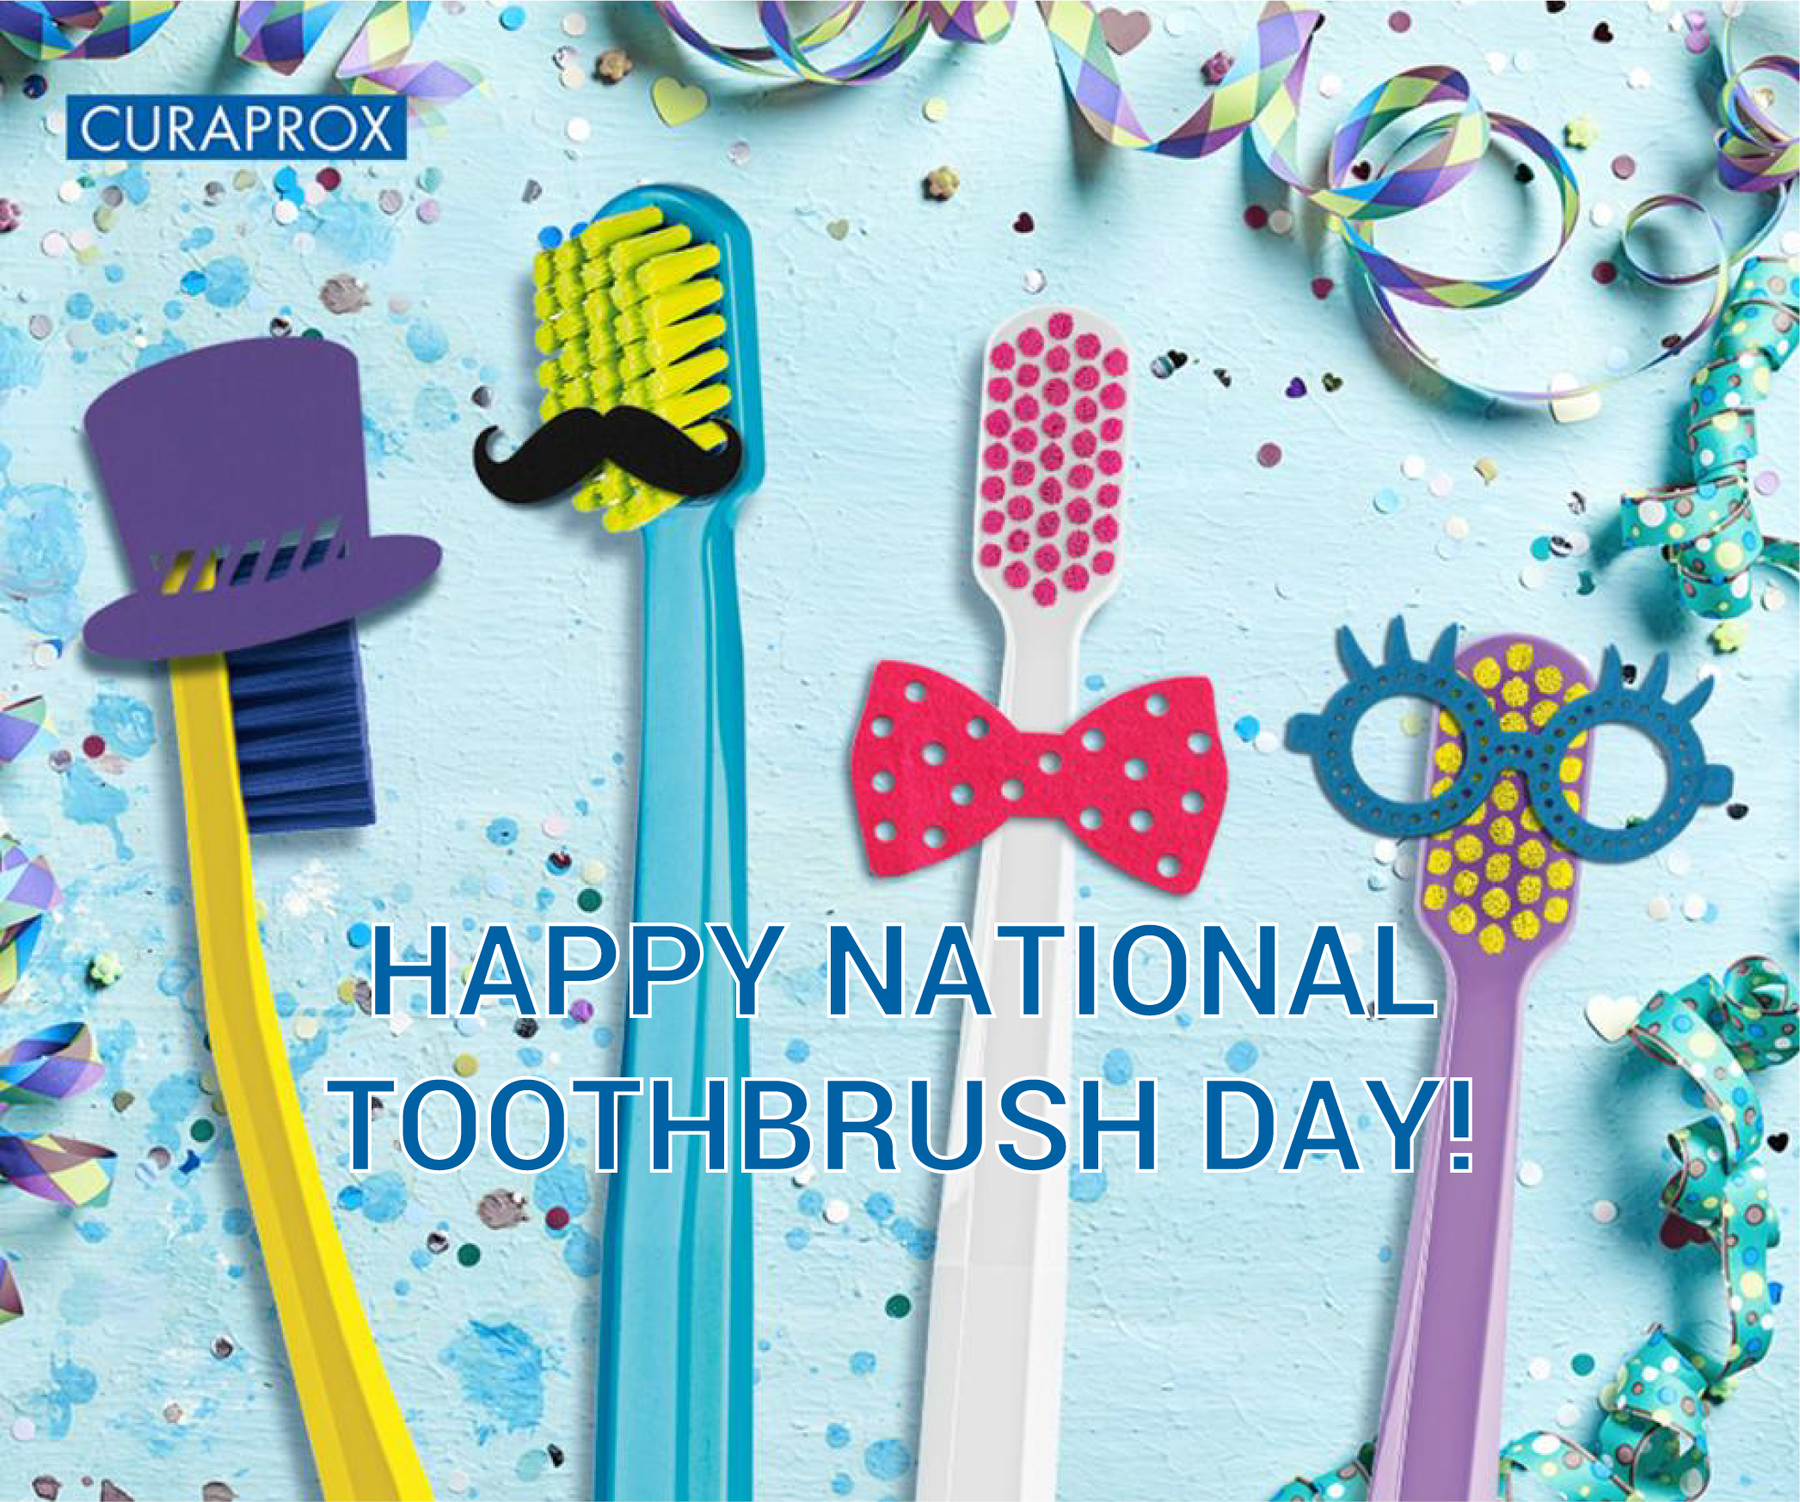 Happy National Toothbrush Day!